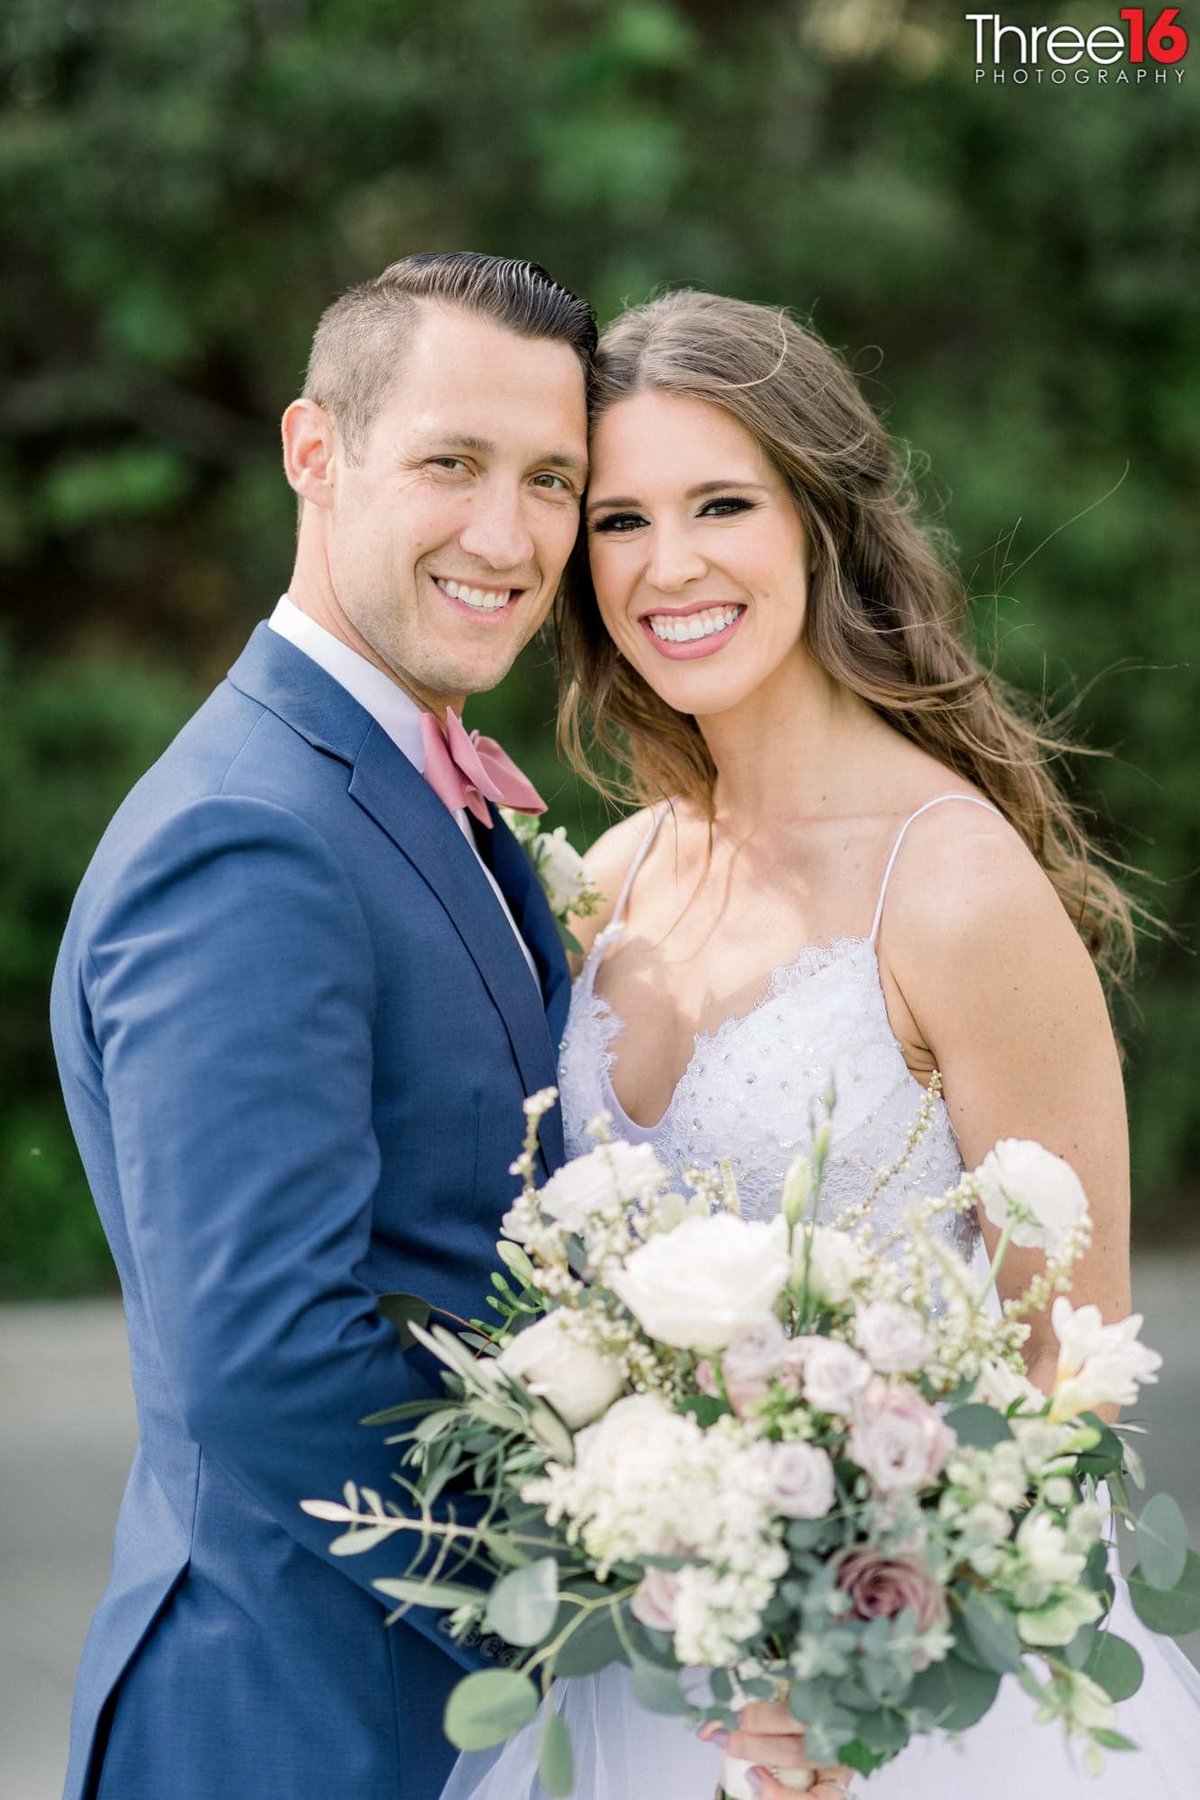 Bride and Groom are all smiles during their photo shoot